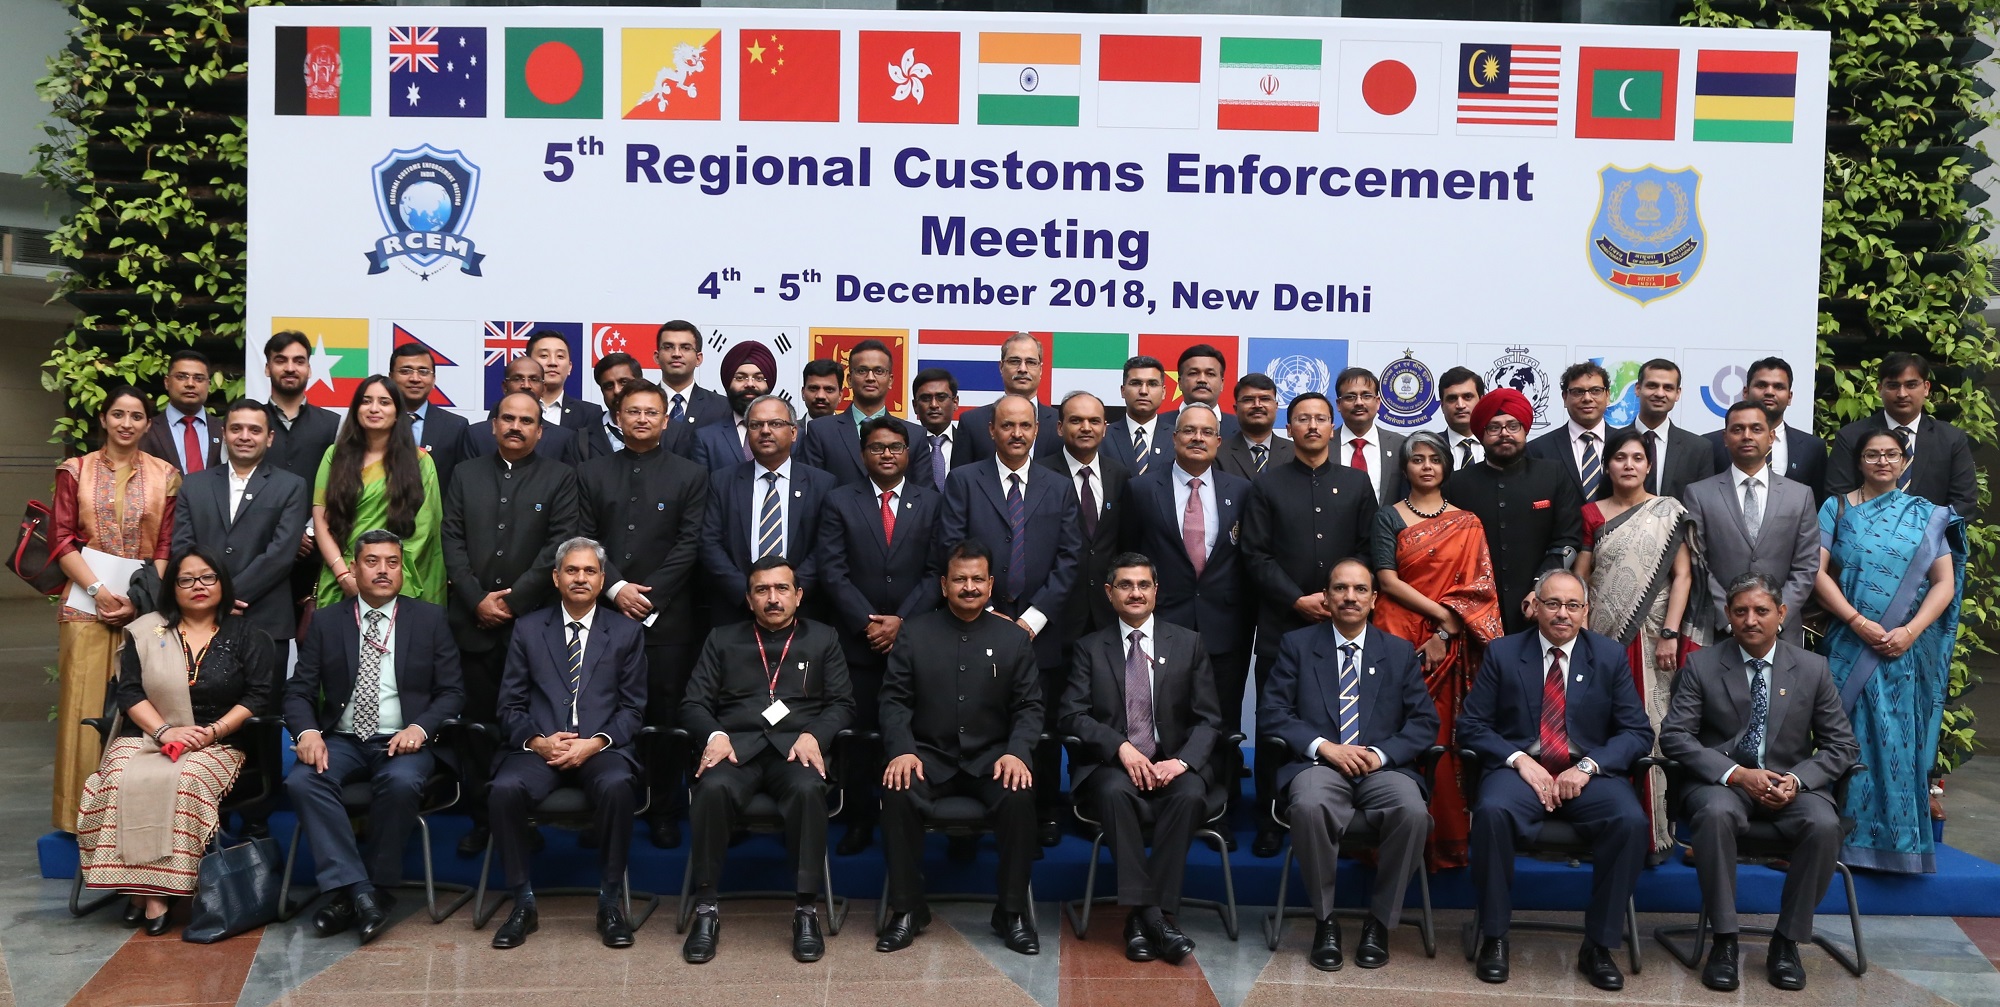 DRI officers and COIN officers participating in 5th Regional Customs Enforcement Meeting 2018 held on 4th-5th December 2018 at in New Delhi.